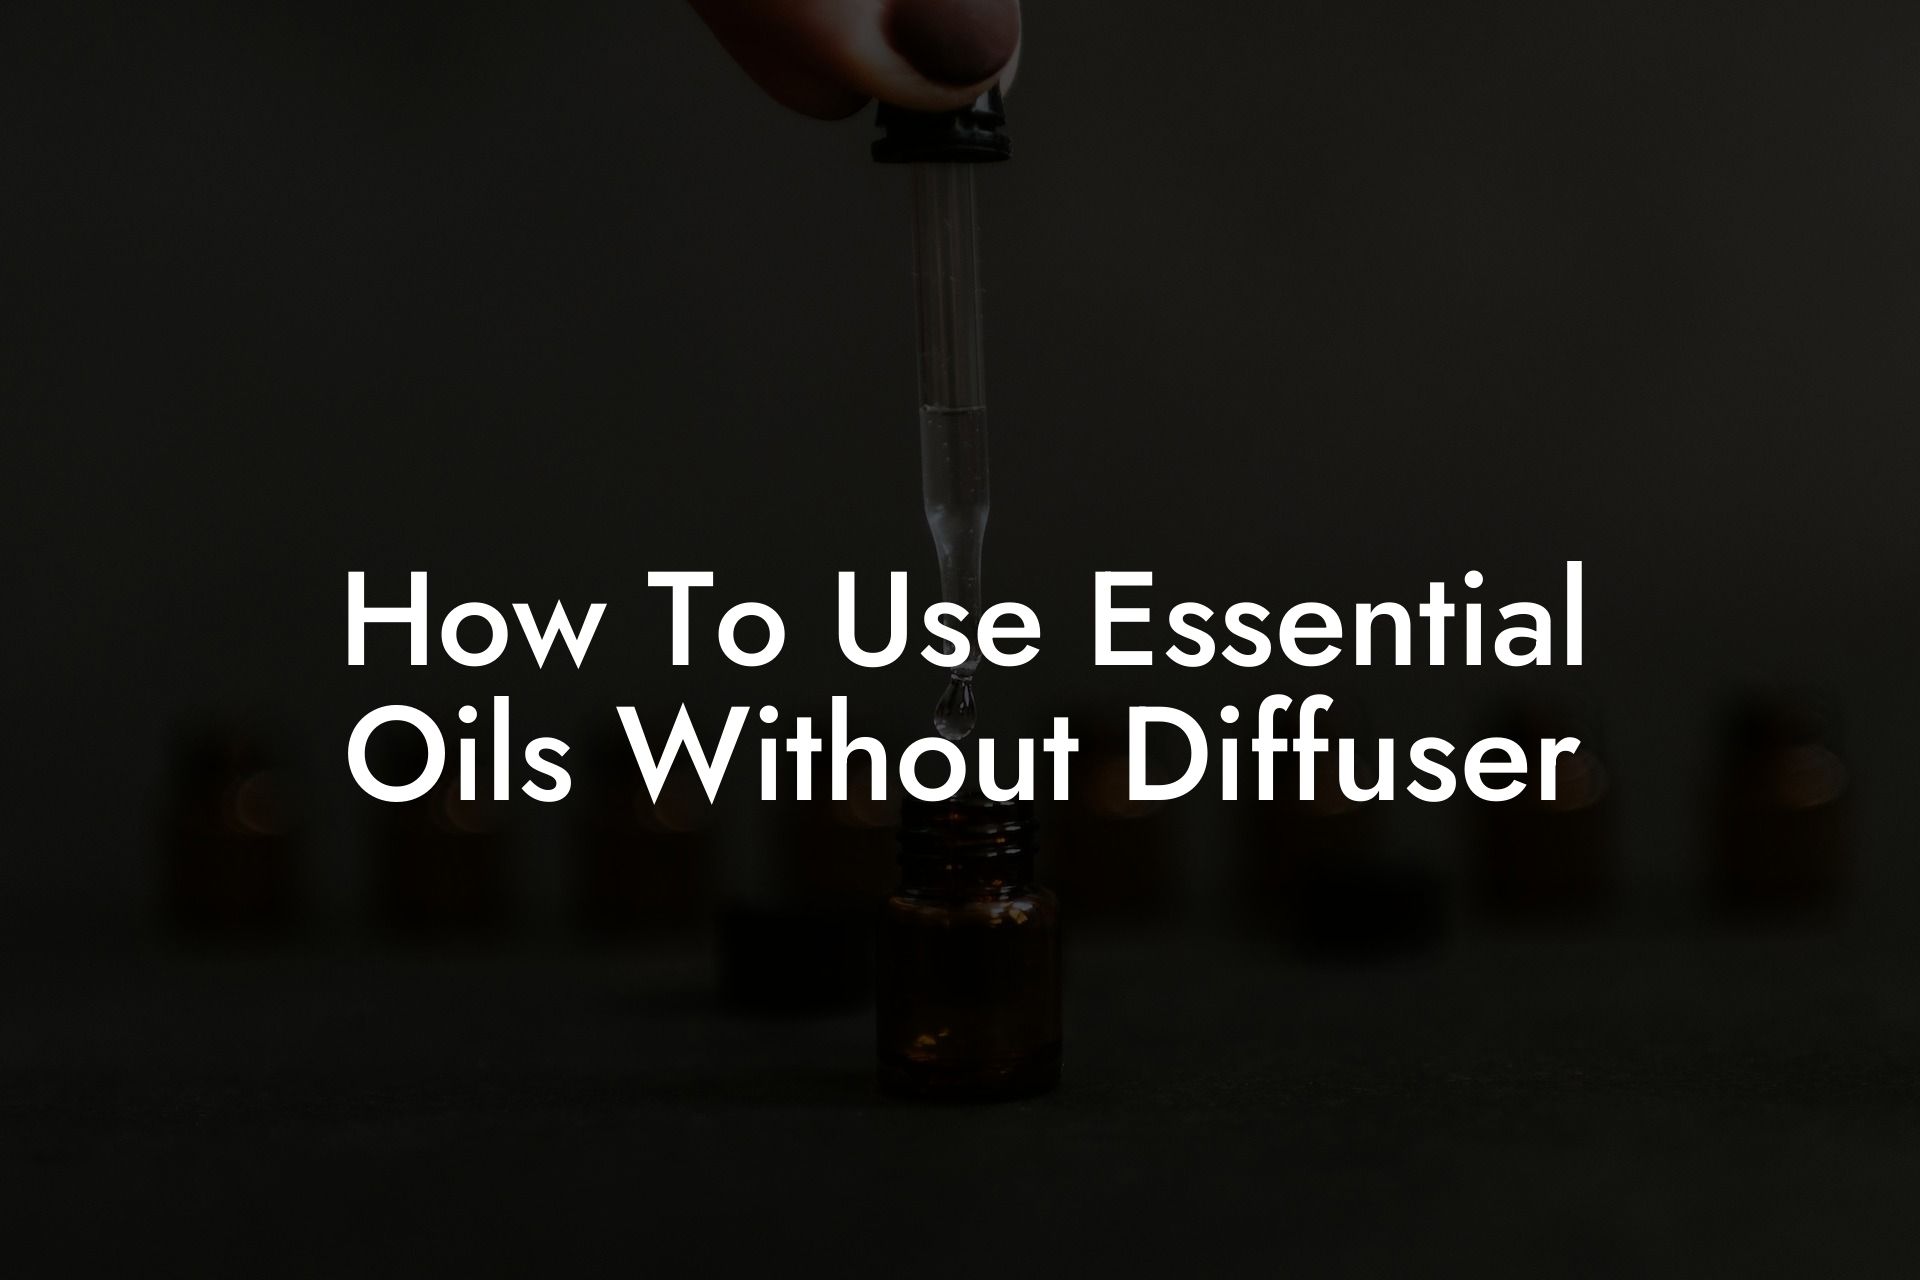 How To Use Essential Oils Without Diffuser